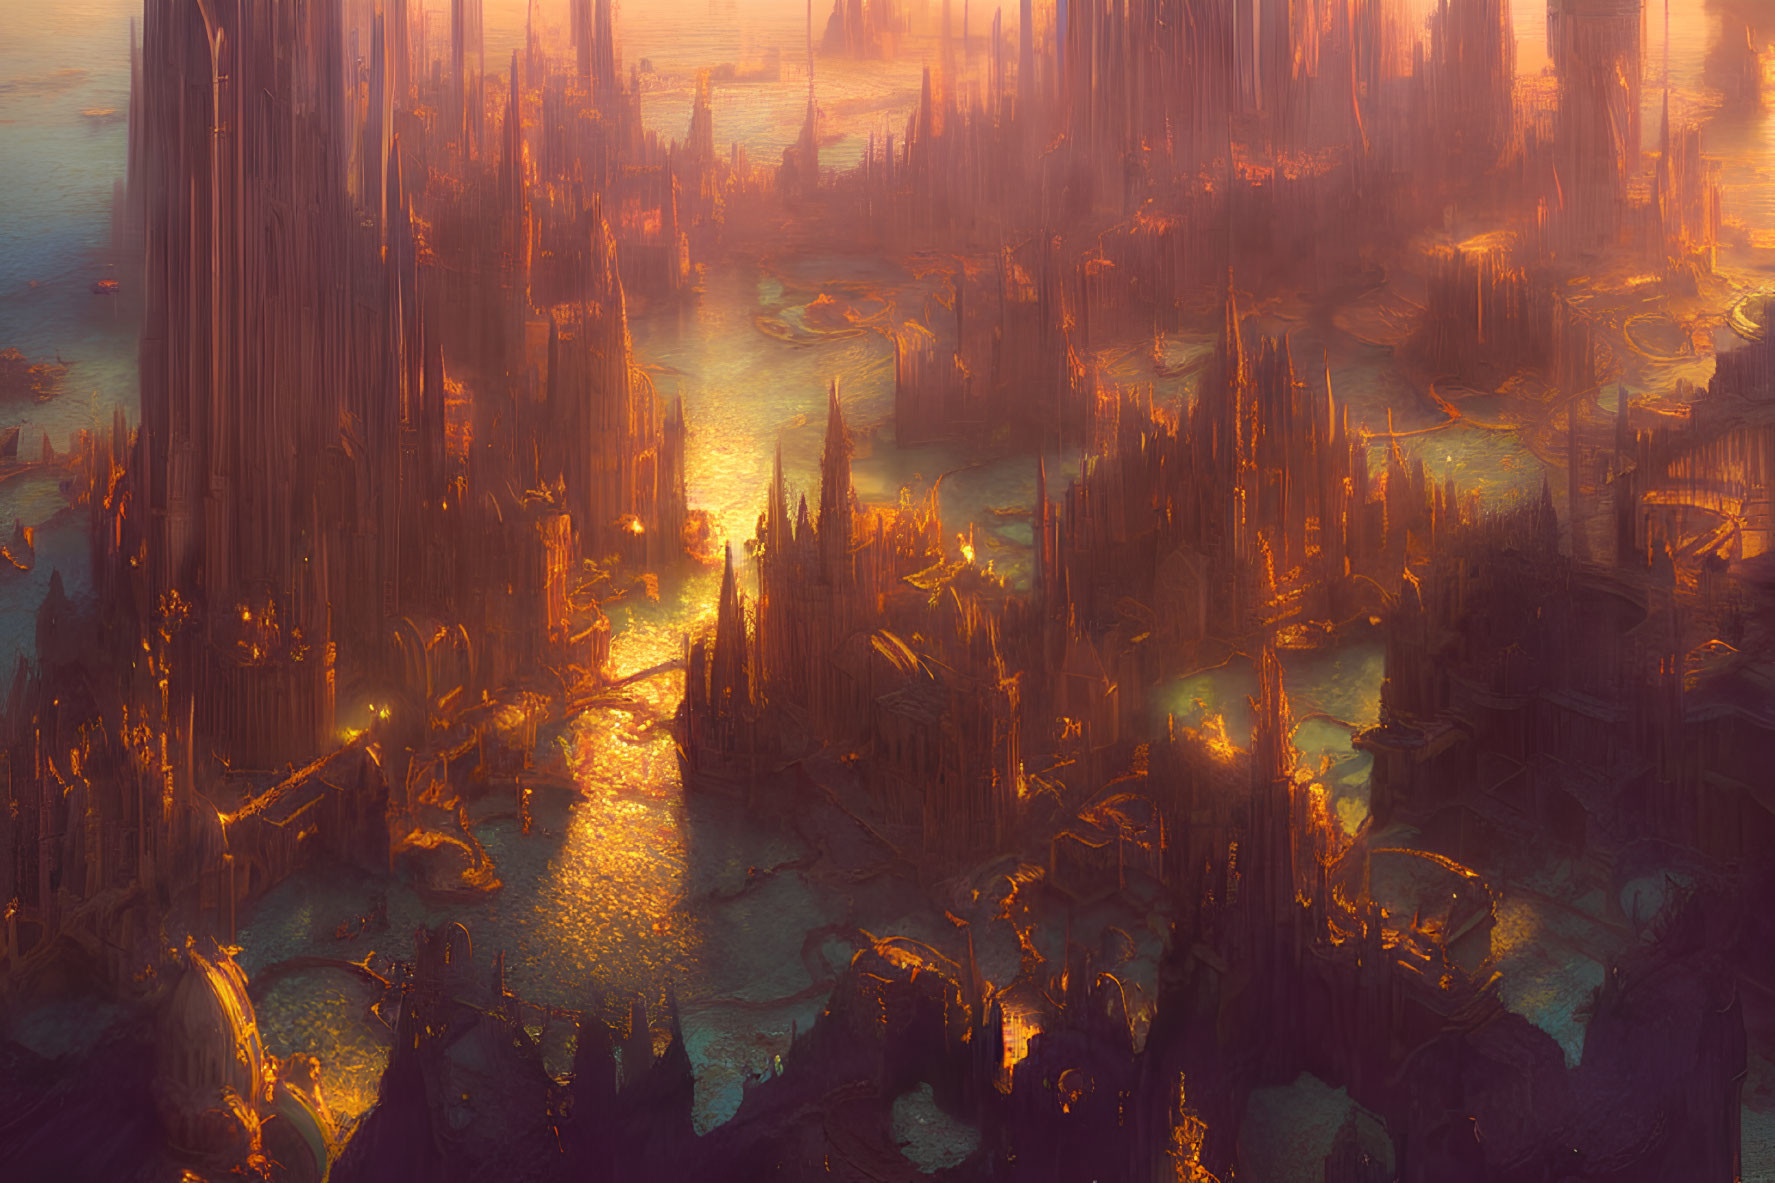 Futuristic cityscape with glowing spires and reflective waterways